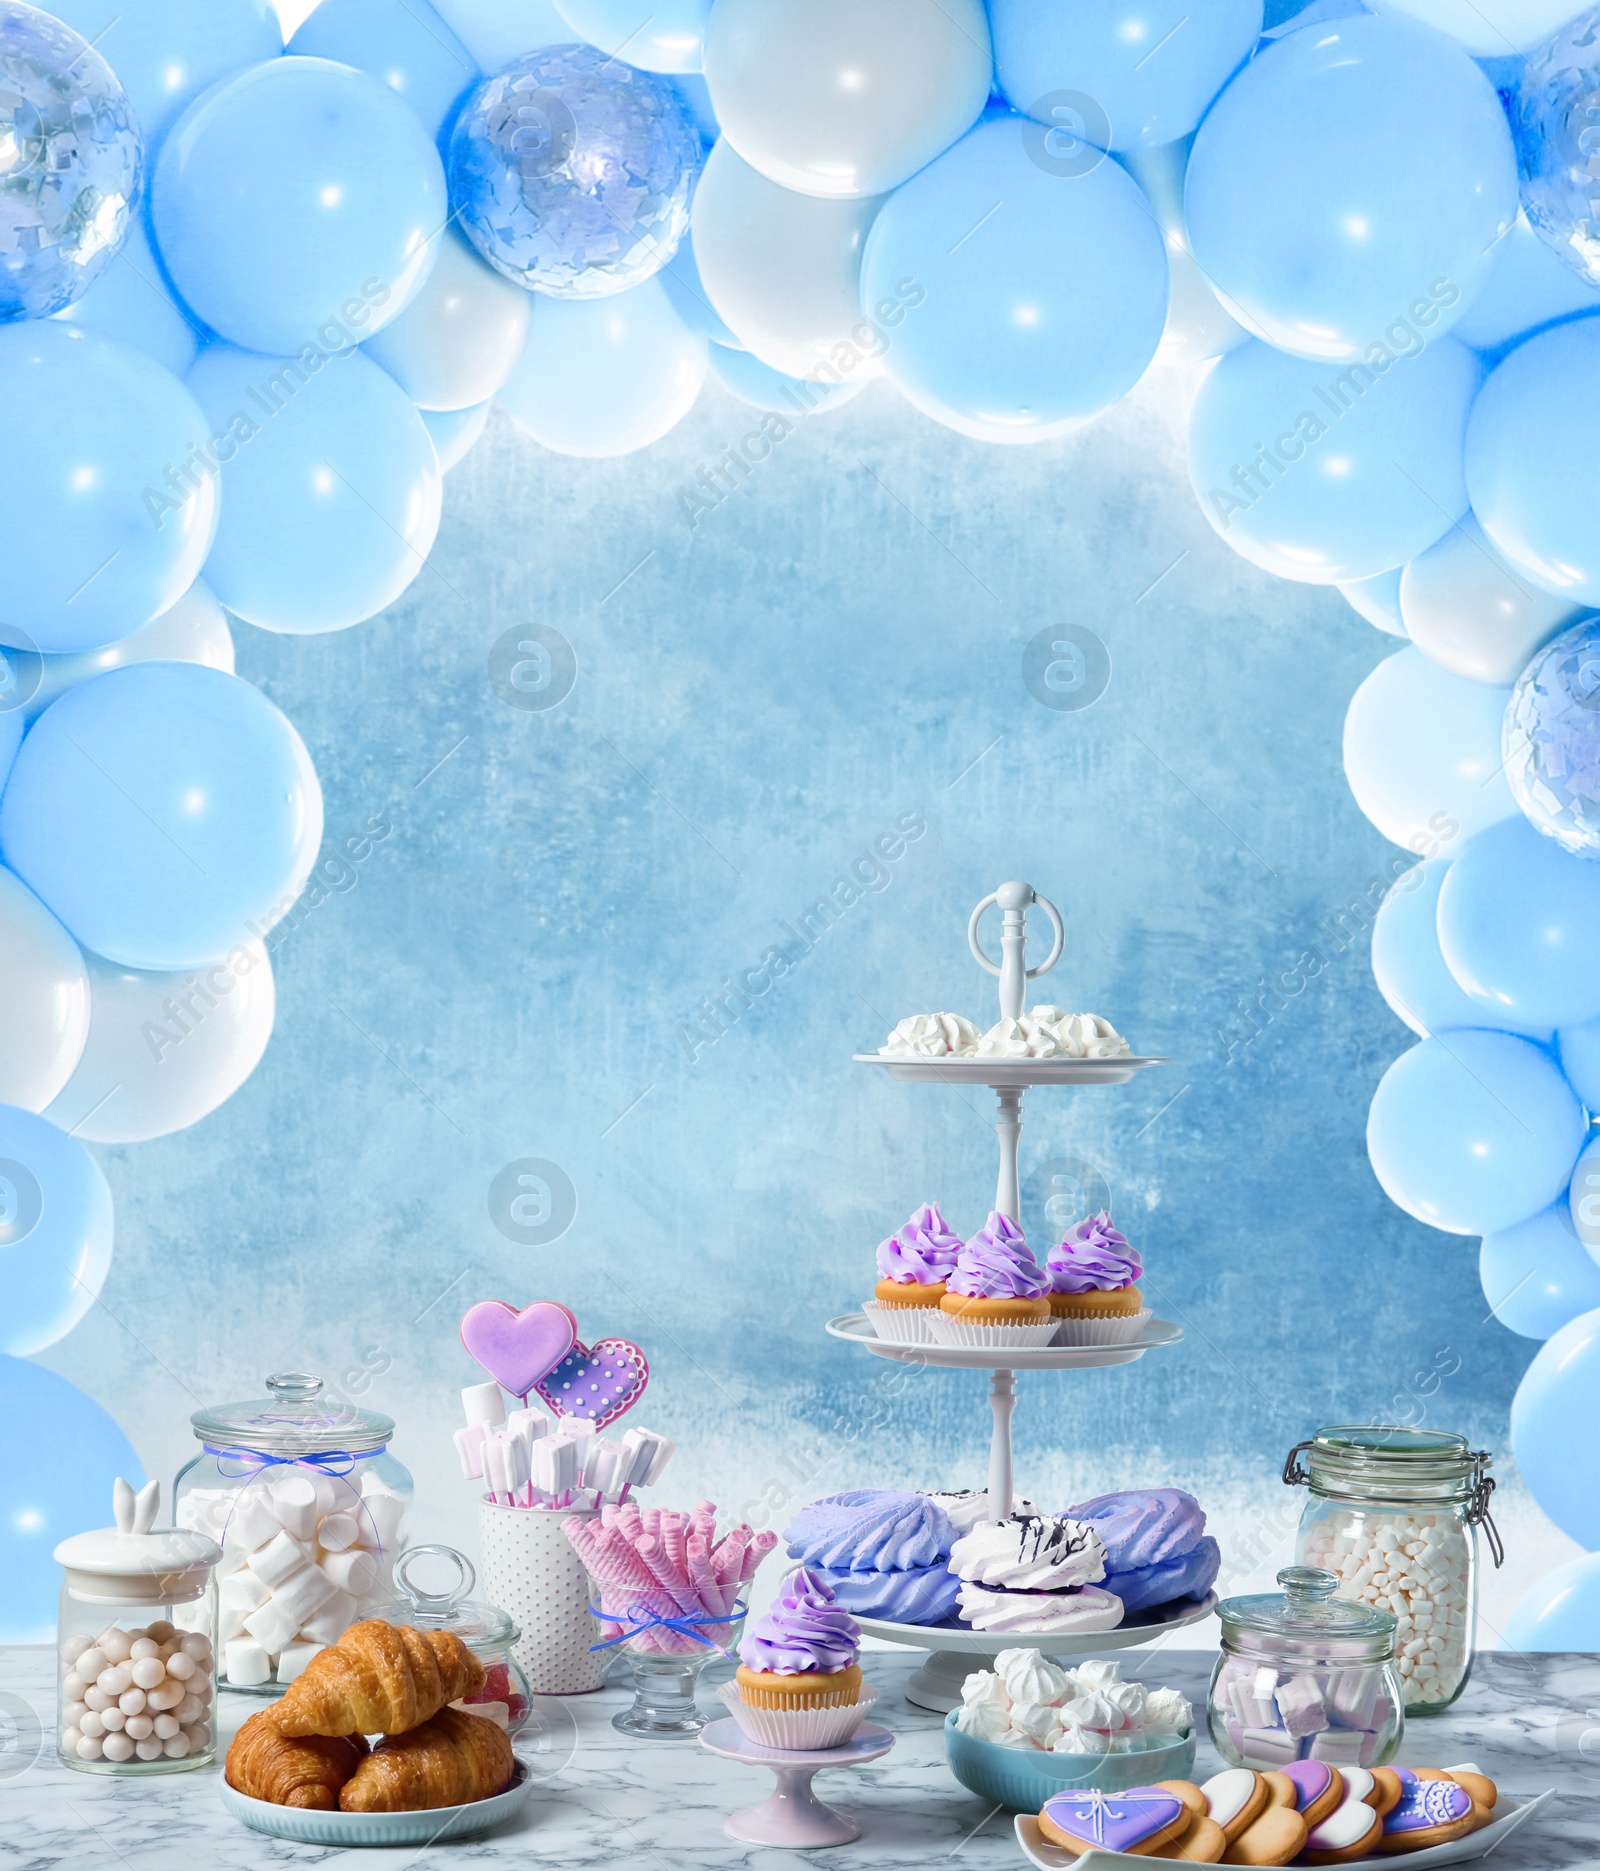 Image of Baby shower party for boy. Tasty treats on table in room decorated with balloons